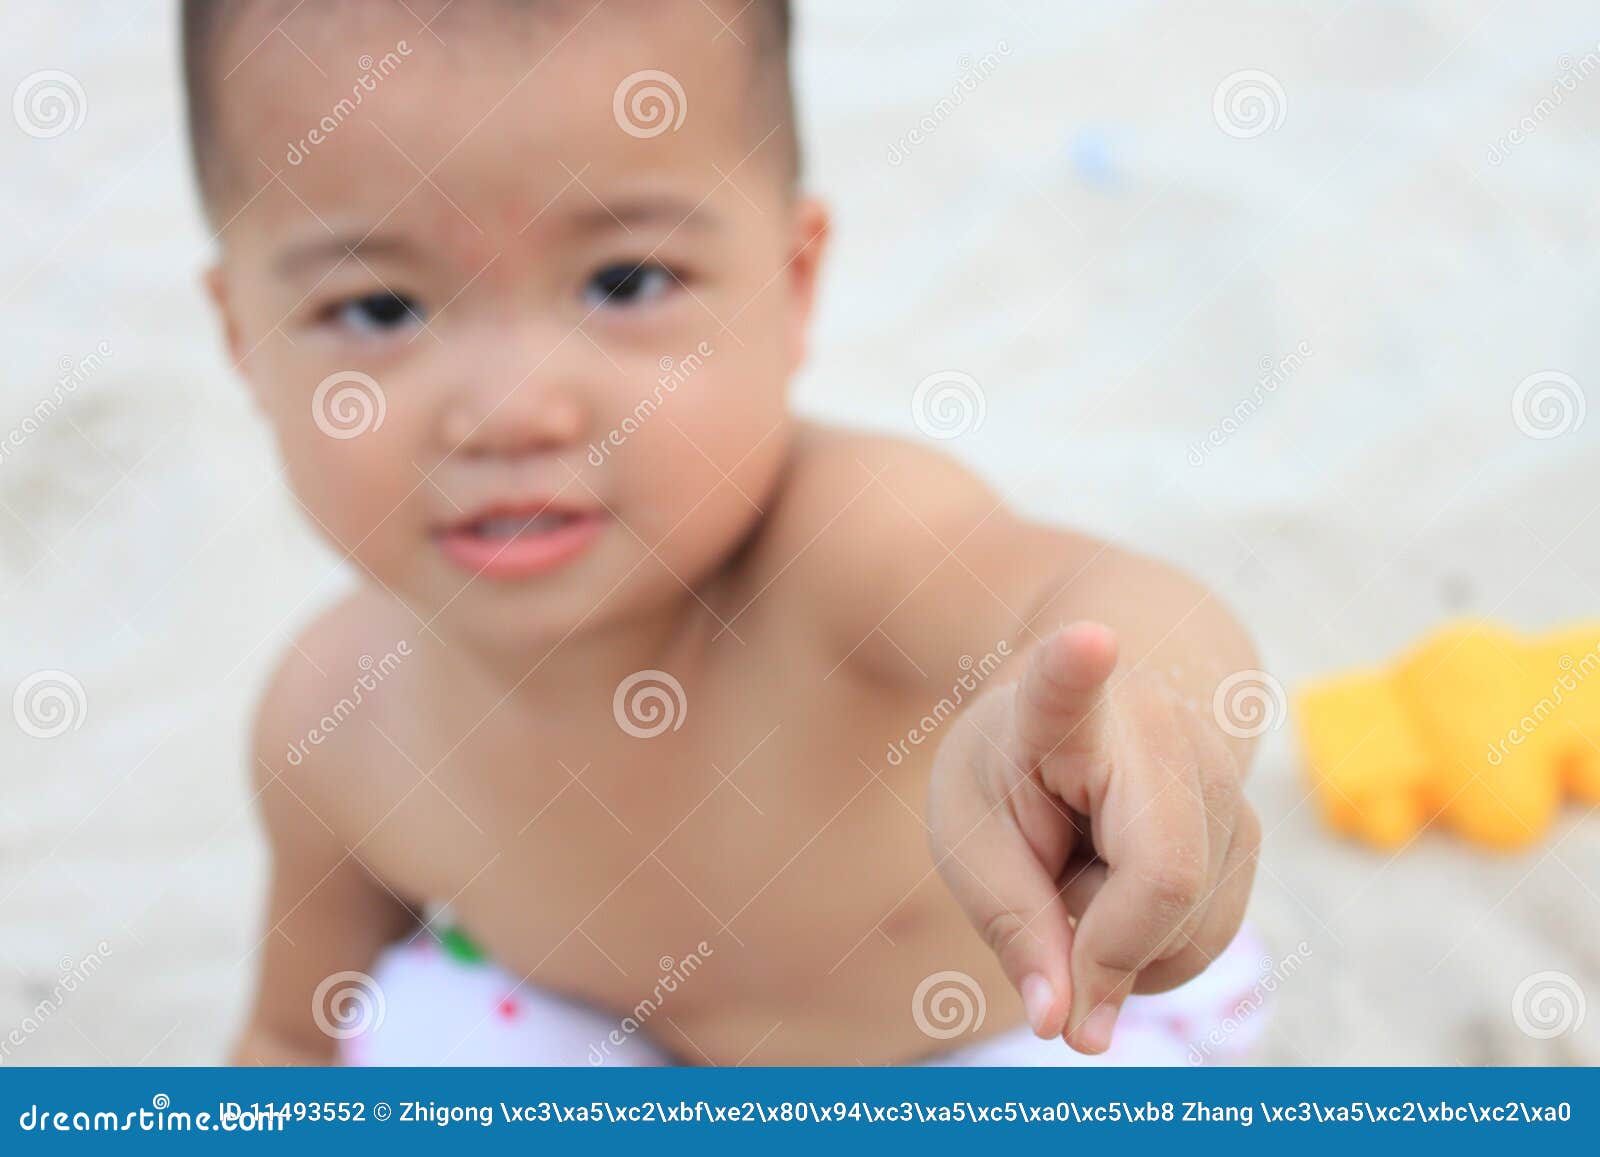 Asian Looking Down Nude - Baby Stretching Out Index Finger,focus On Finger Stock Photo ...